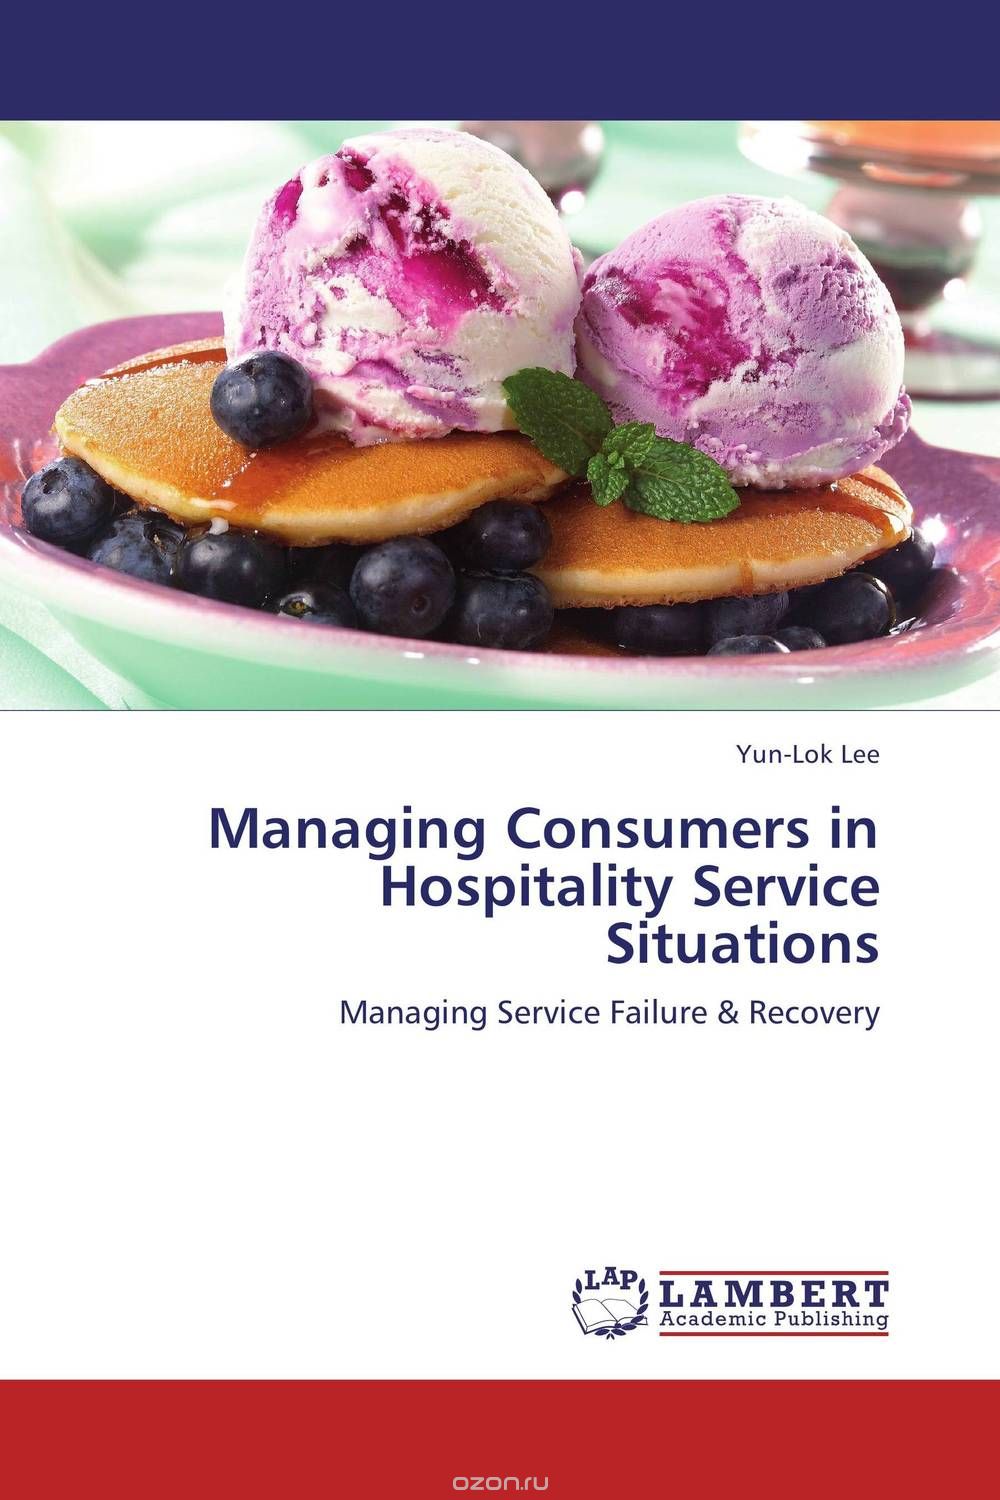 Managing Consumers in Hospitality Service Situations